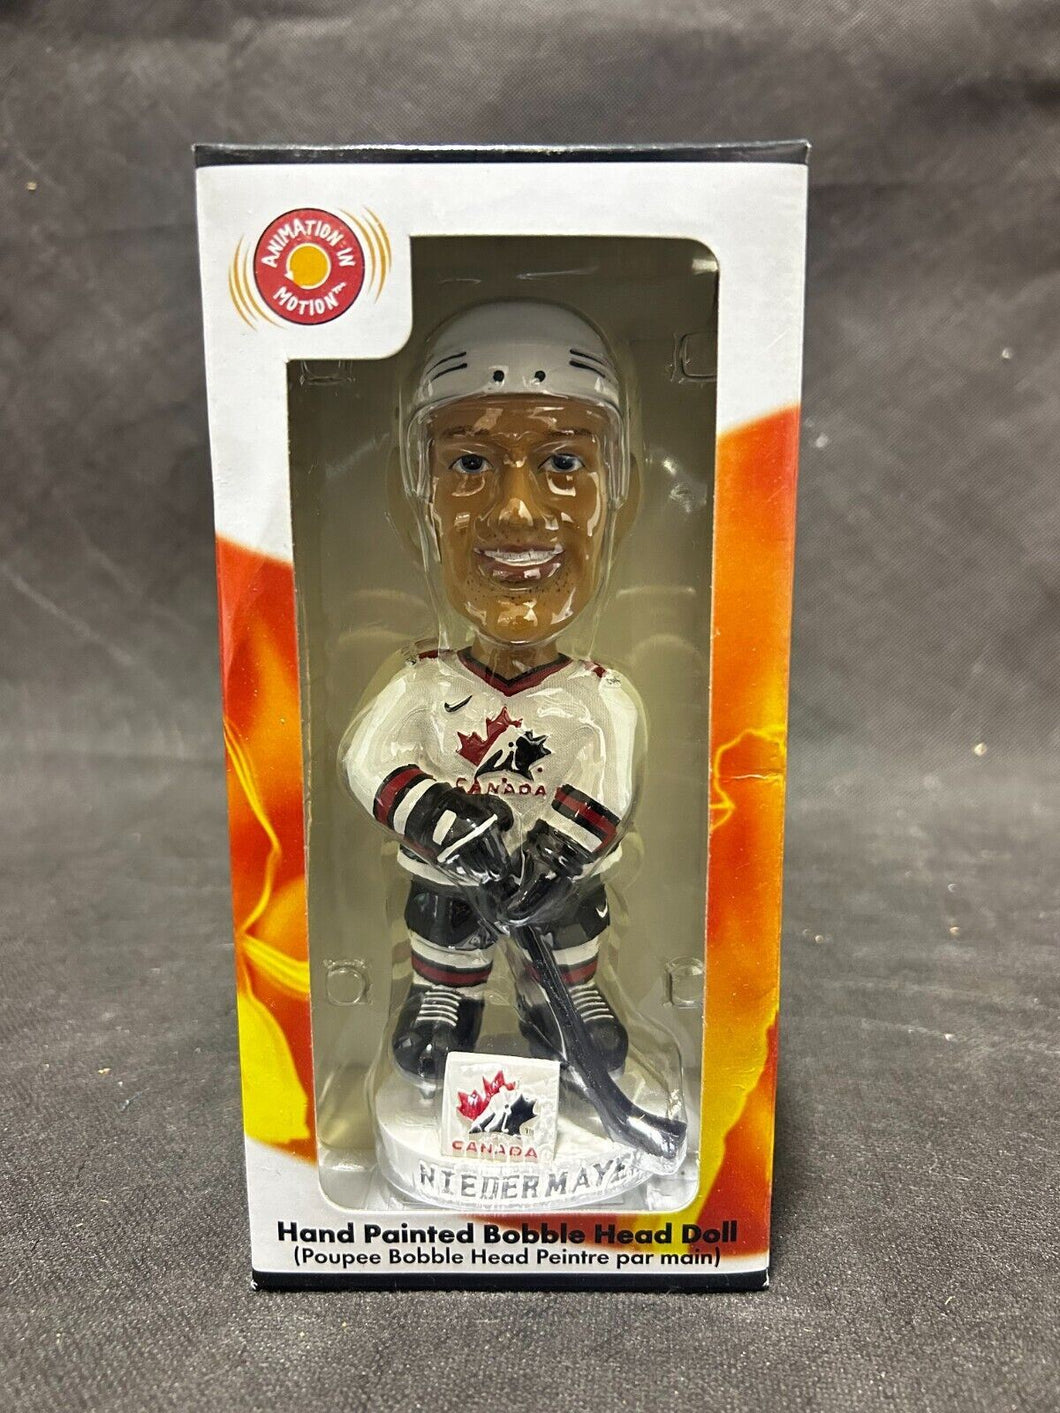 2002 Olympic Collectible Hand Painted BobbleHead Doll of Niedermayer Team Canada